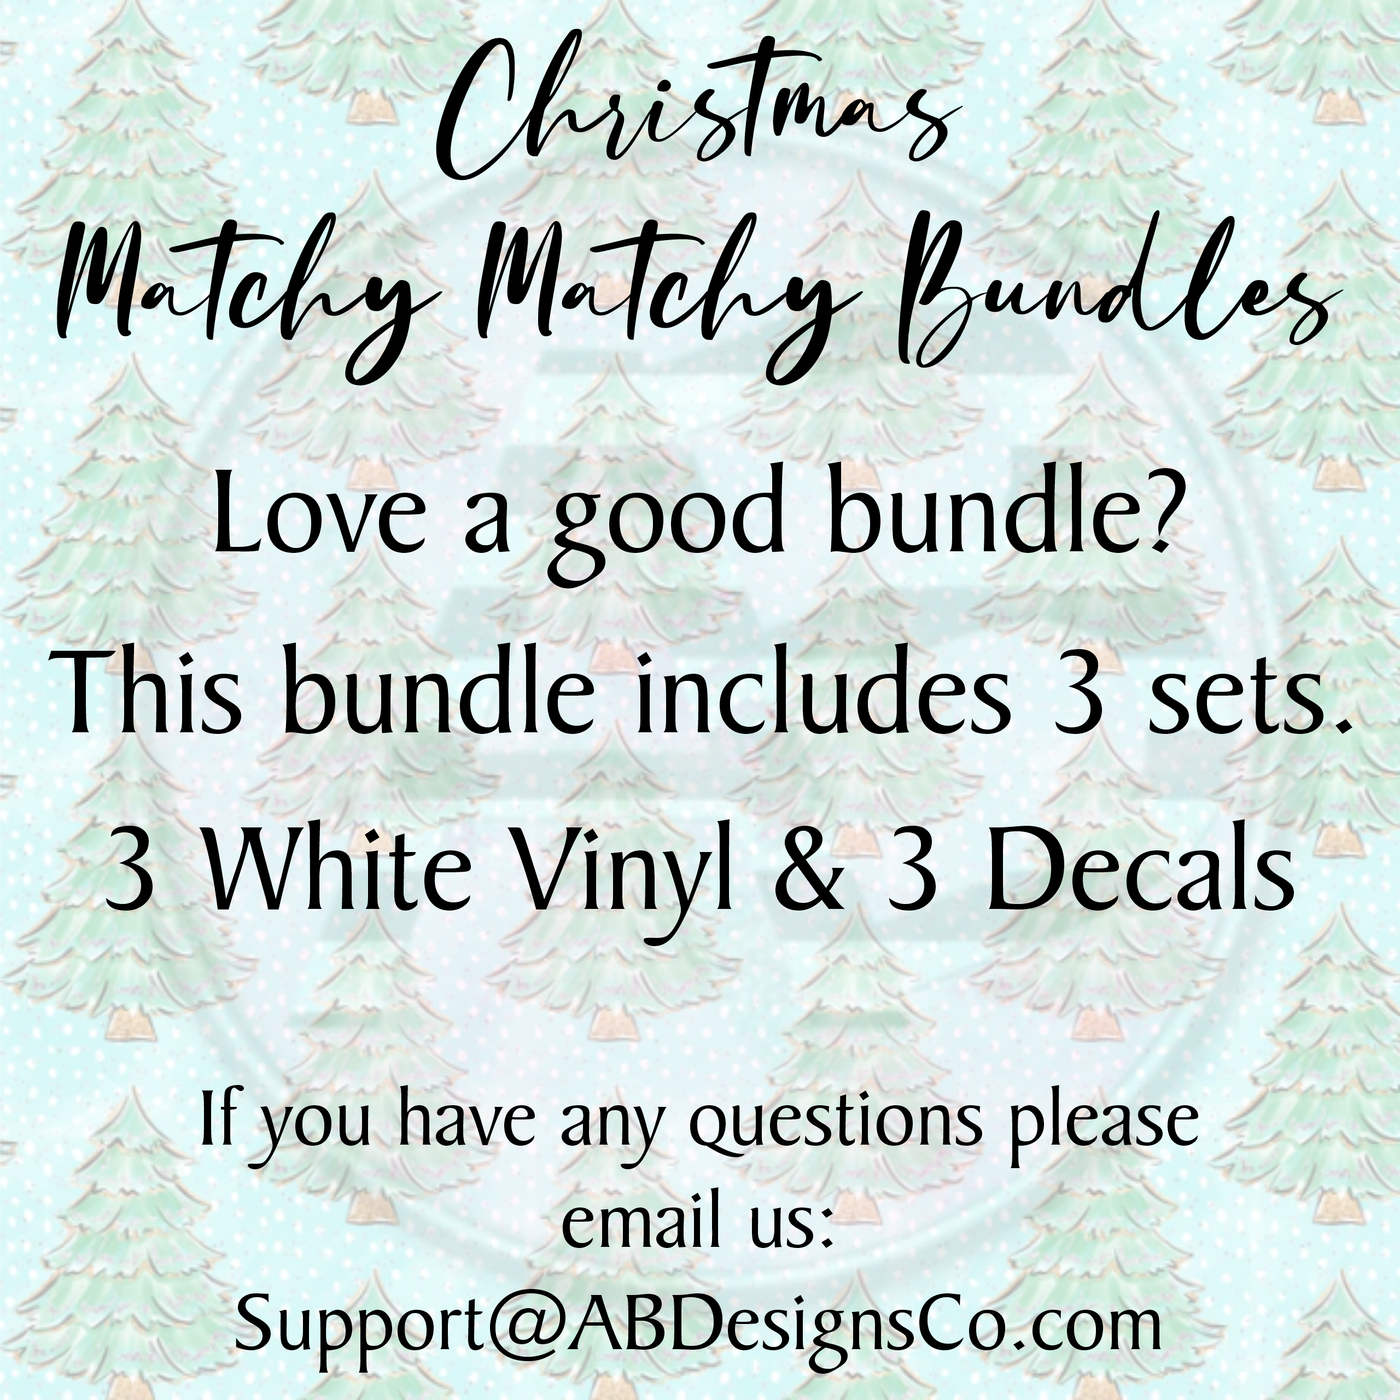 Christmas Matchy Matchy Bundles (Vinyl and Decals)